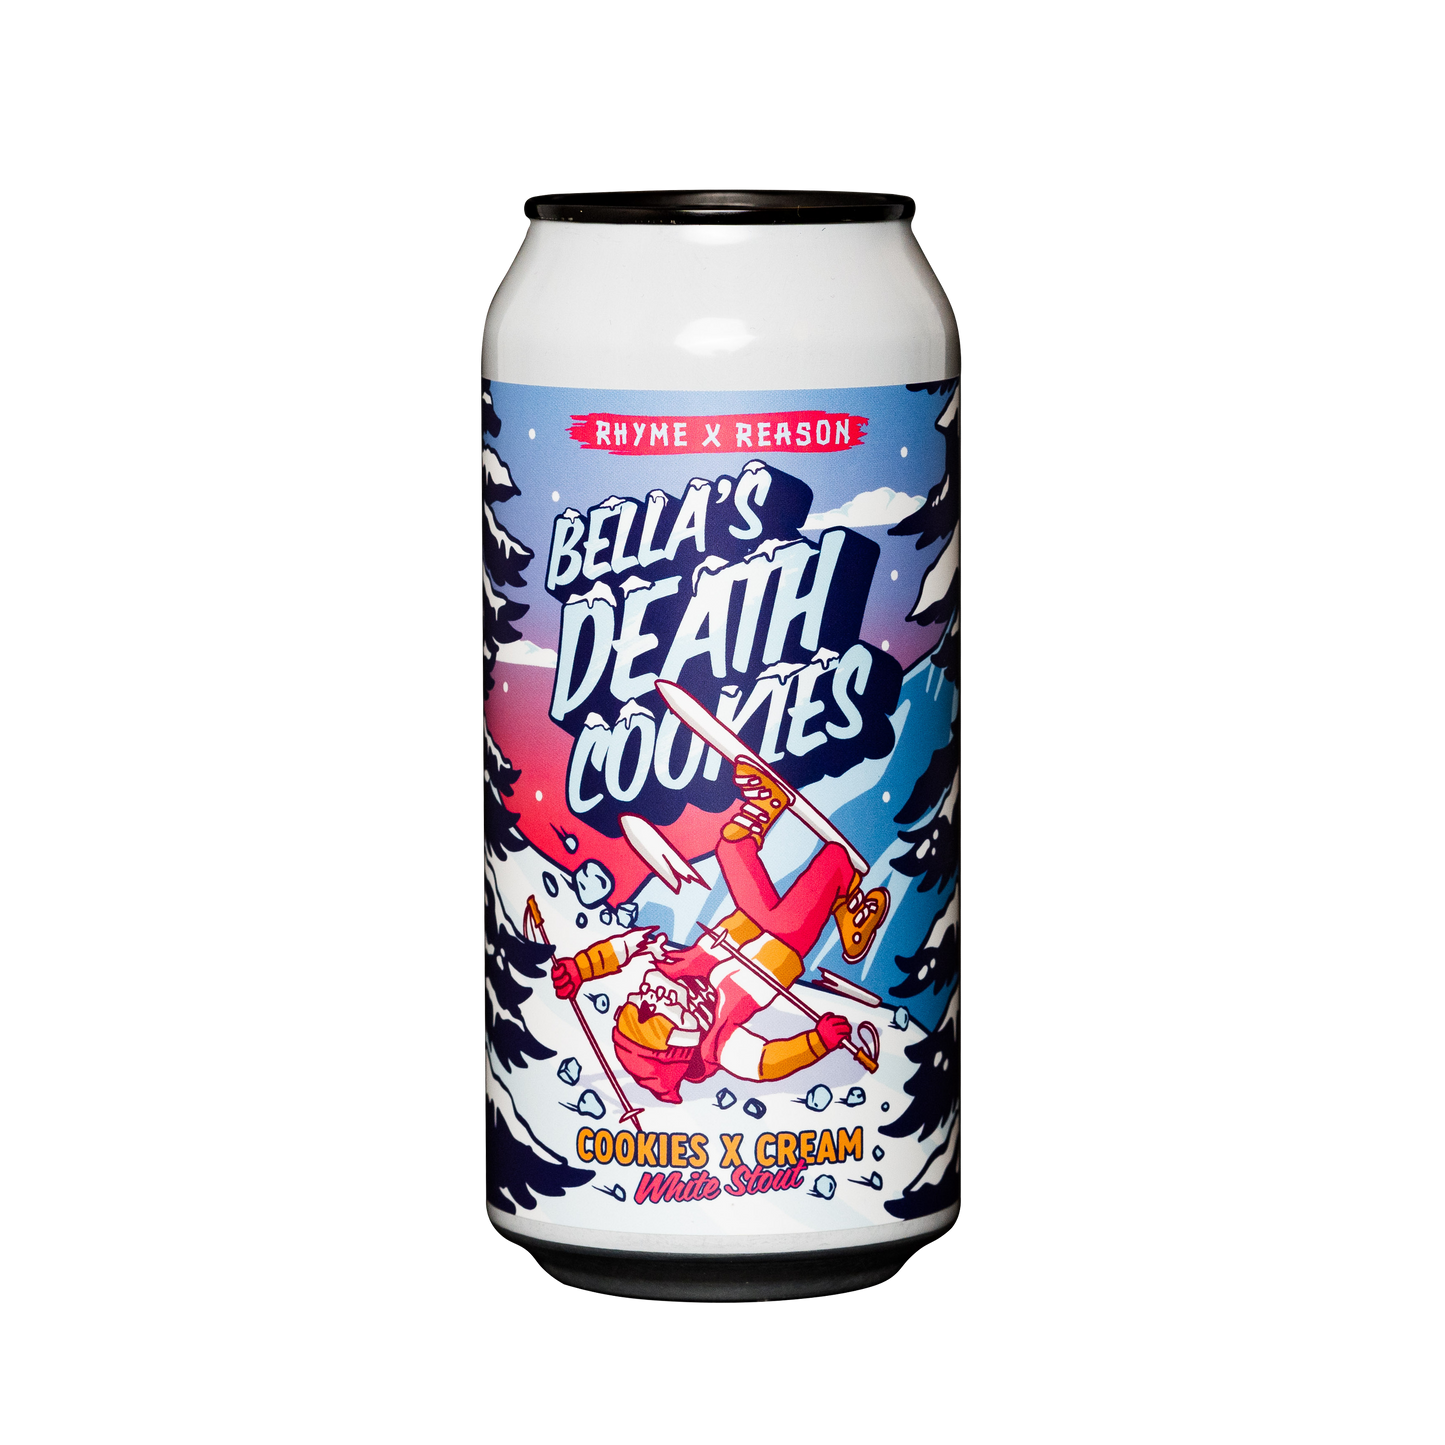 Bella's Death Cookies - Cookies x Cream White Stout - 440mL (Six Pack)